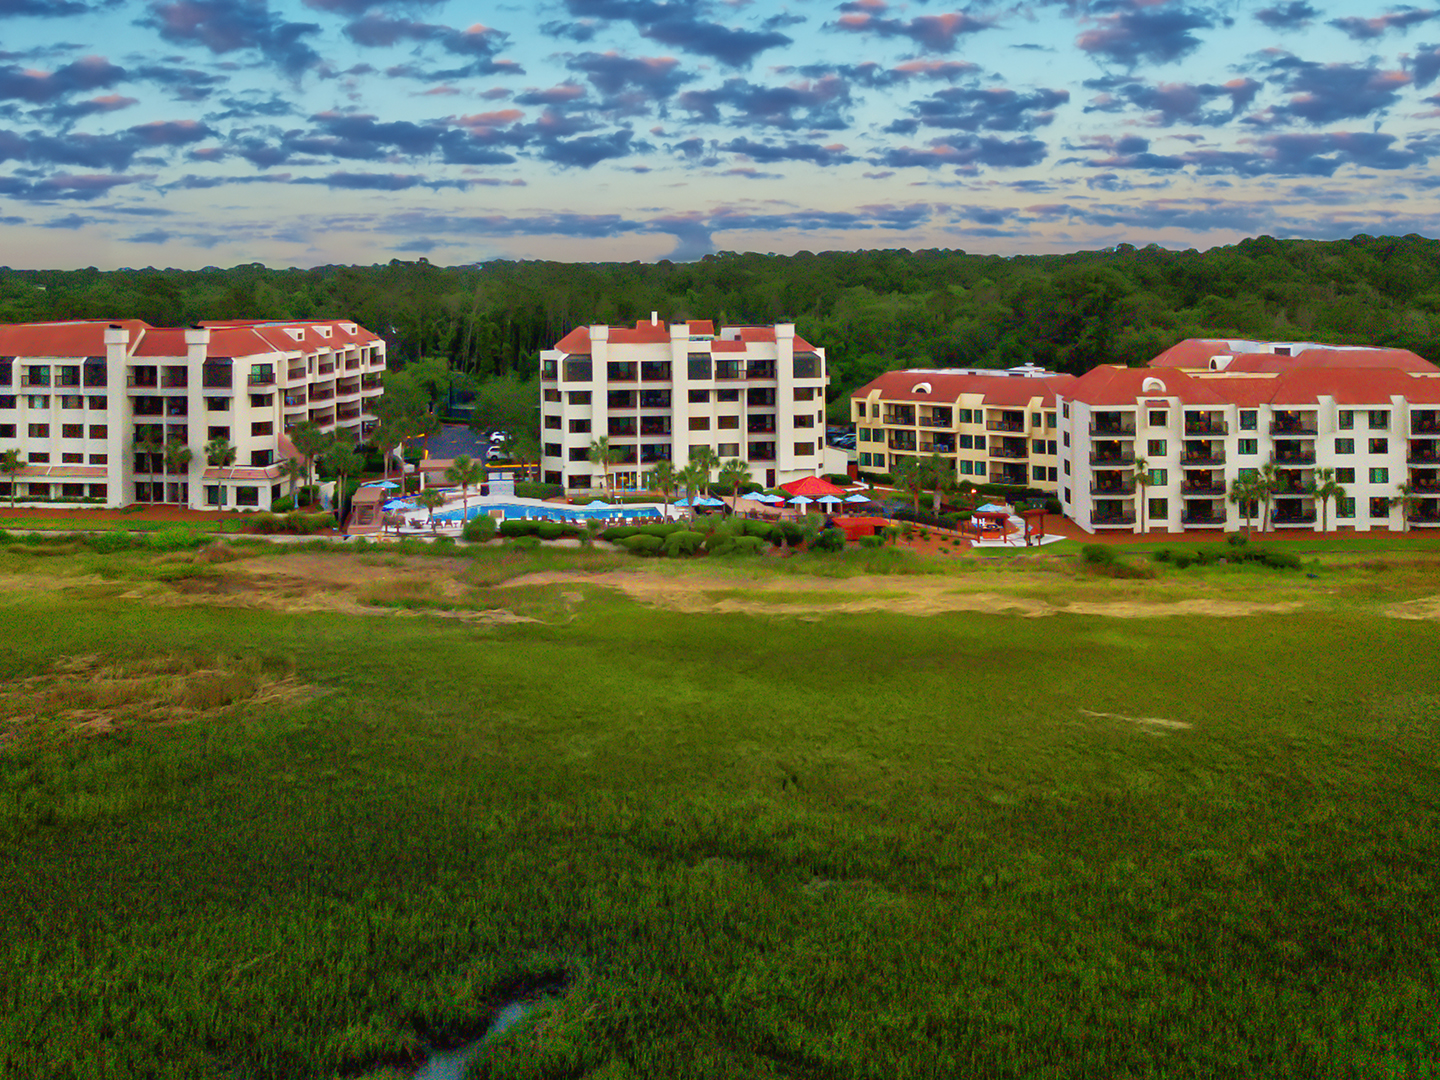 Marriott's Harbour Point Exterior Aerial View. Marriott's Harbour Point is located in Hilton Head Island, South Carolina United States.